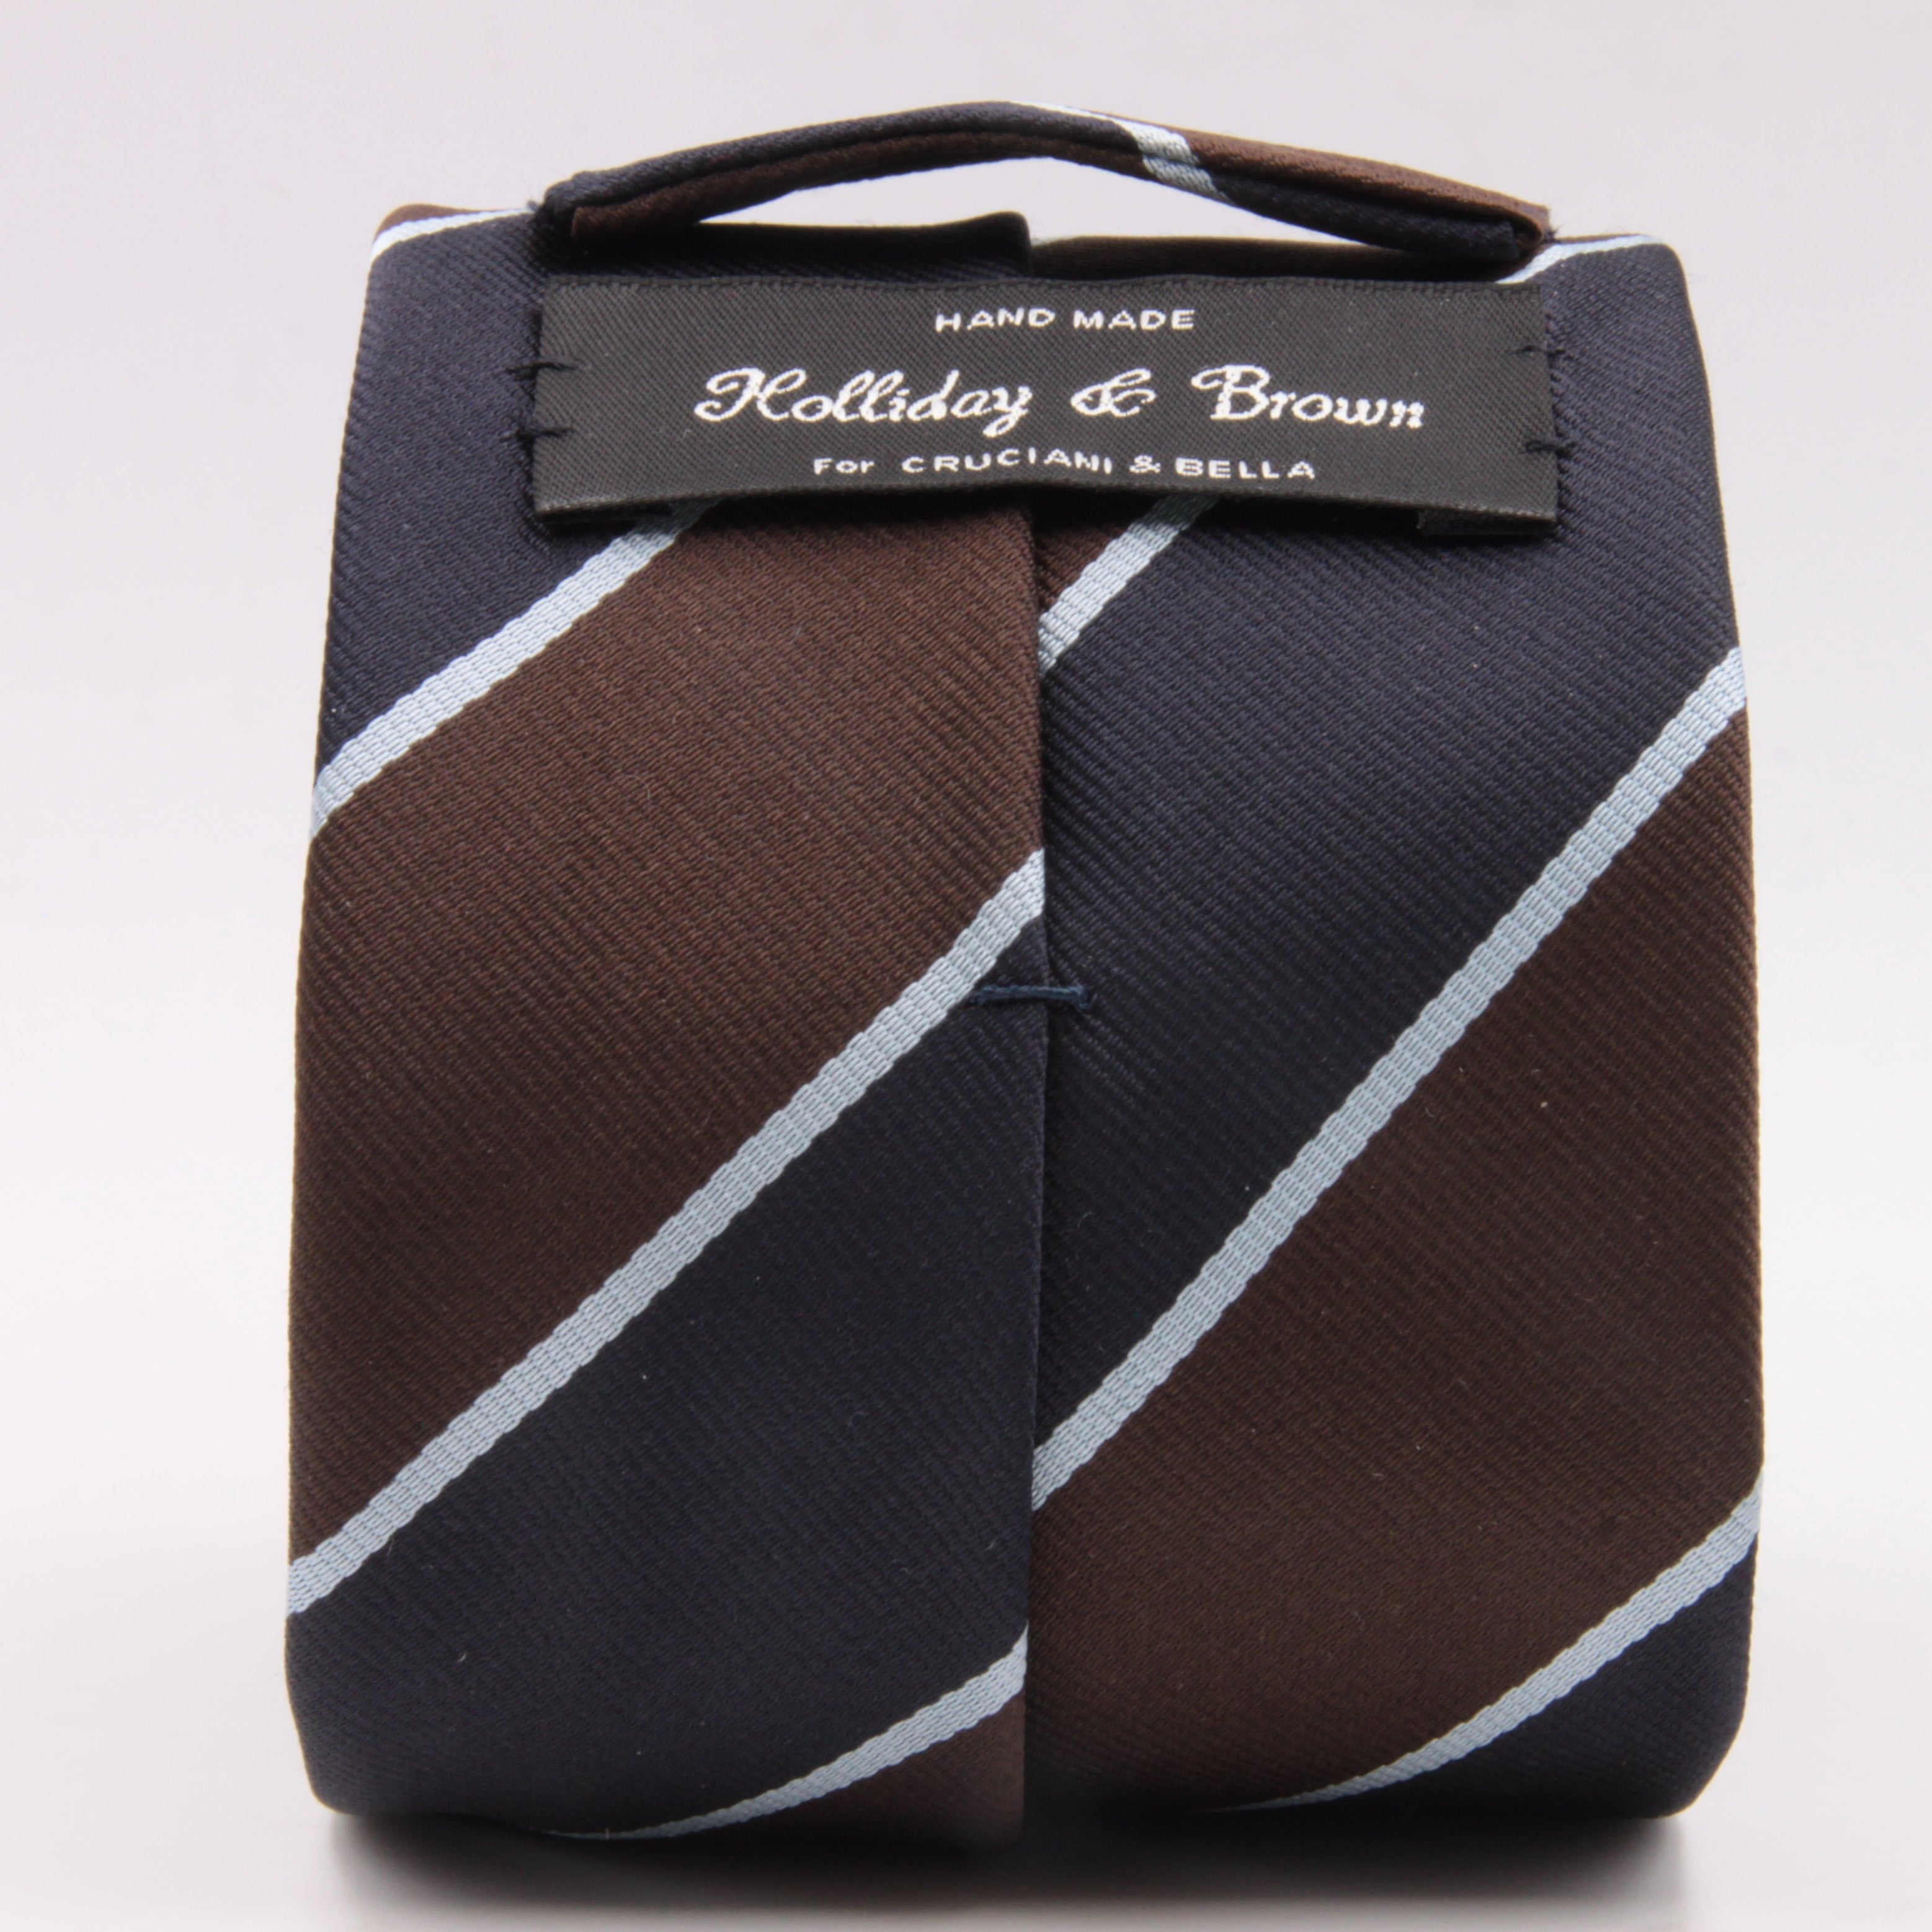 Holliday & Brown for Cruciani & Bella 100% Silk Jacquard  Regimental "University College Hospital" Blue, Brown and Light Blue stripes tie Handmade in Italy 8 cm x 150 cm #5117